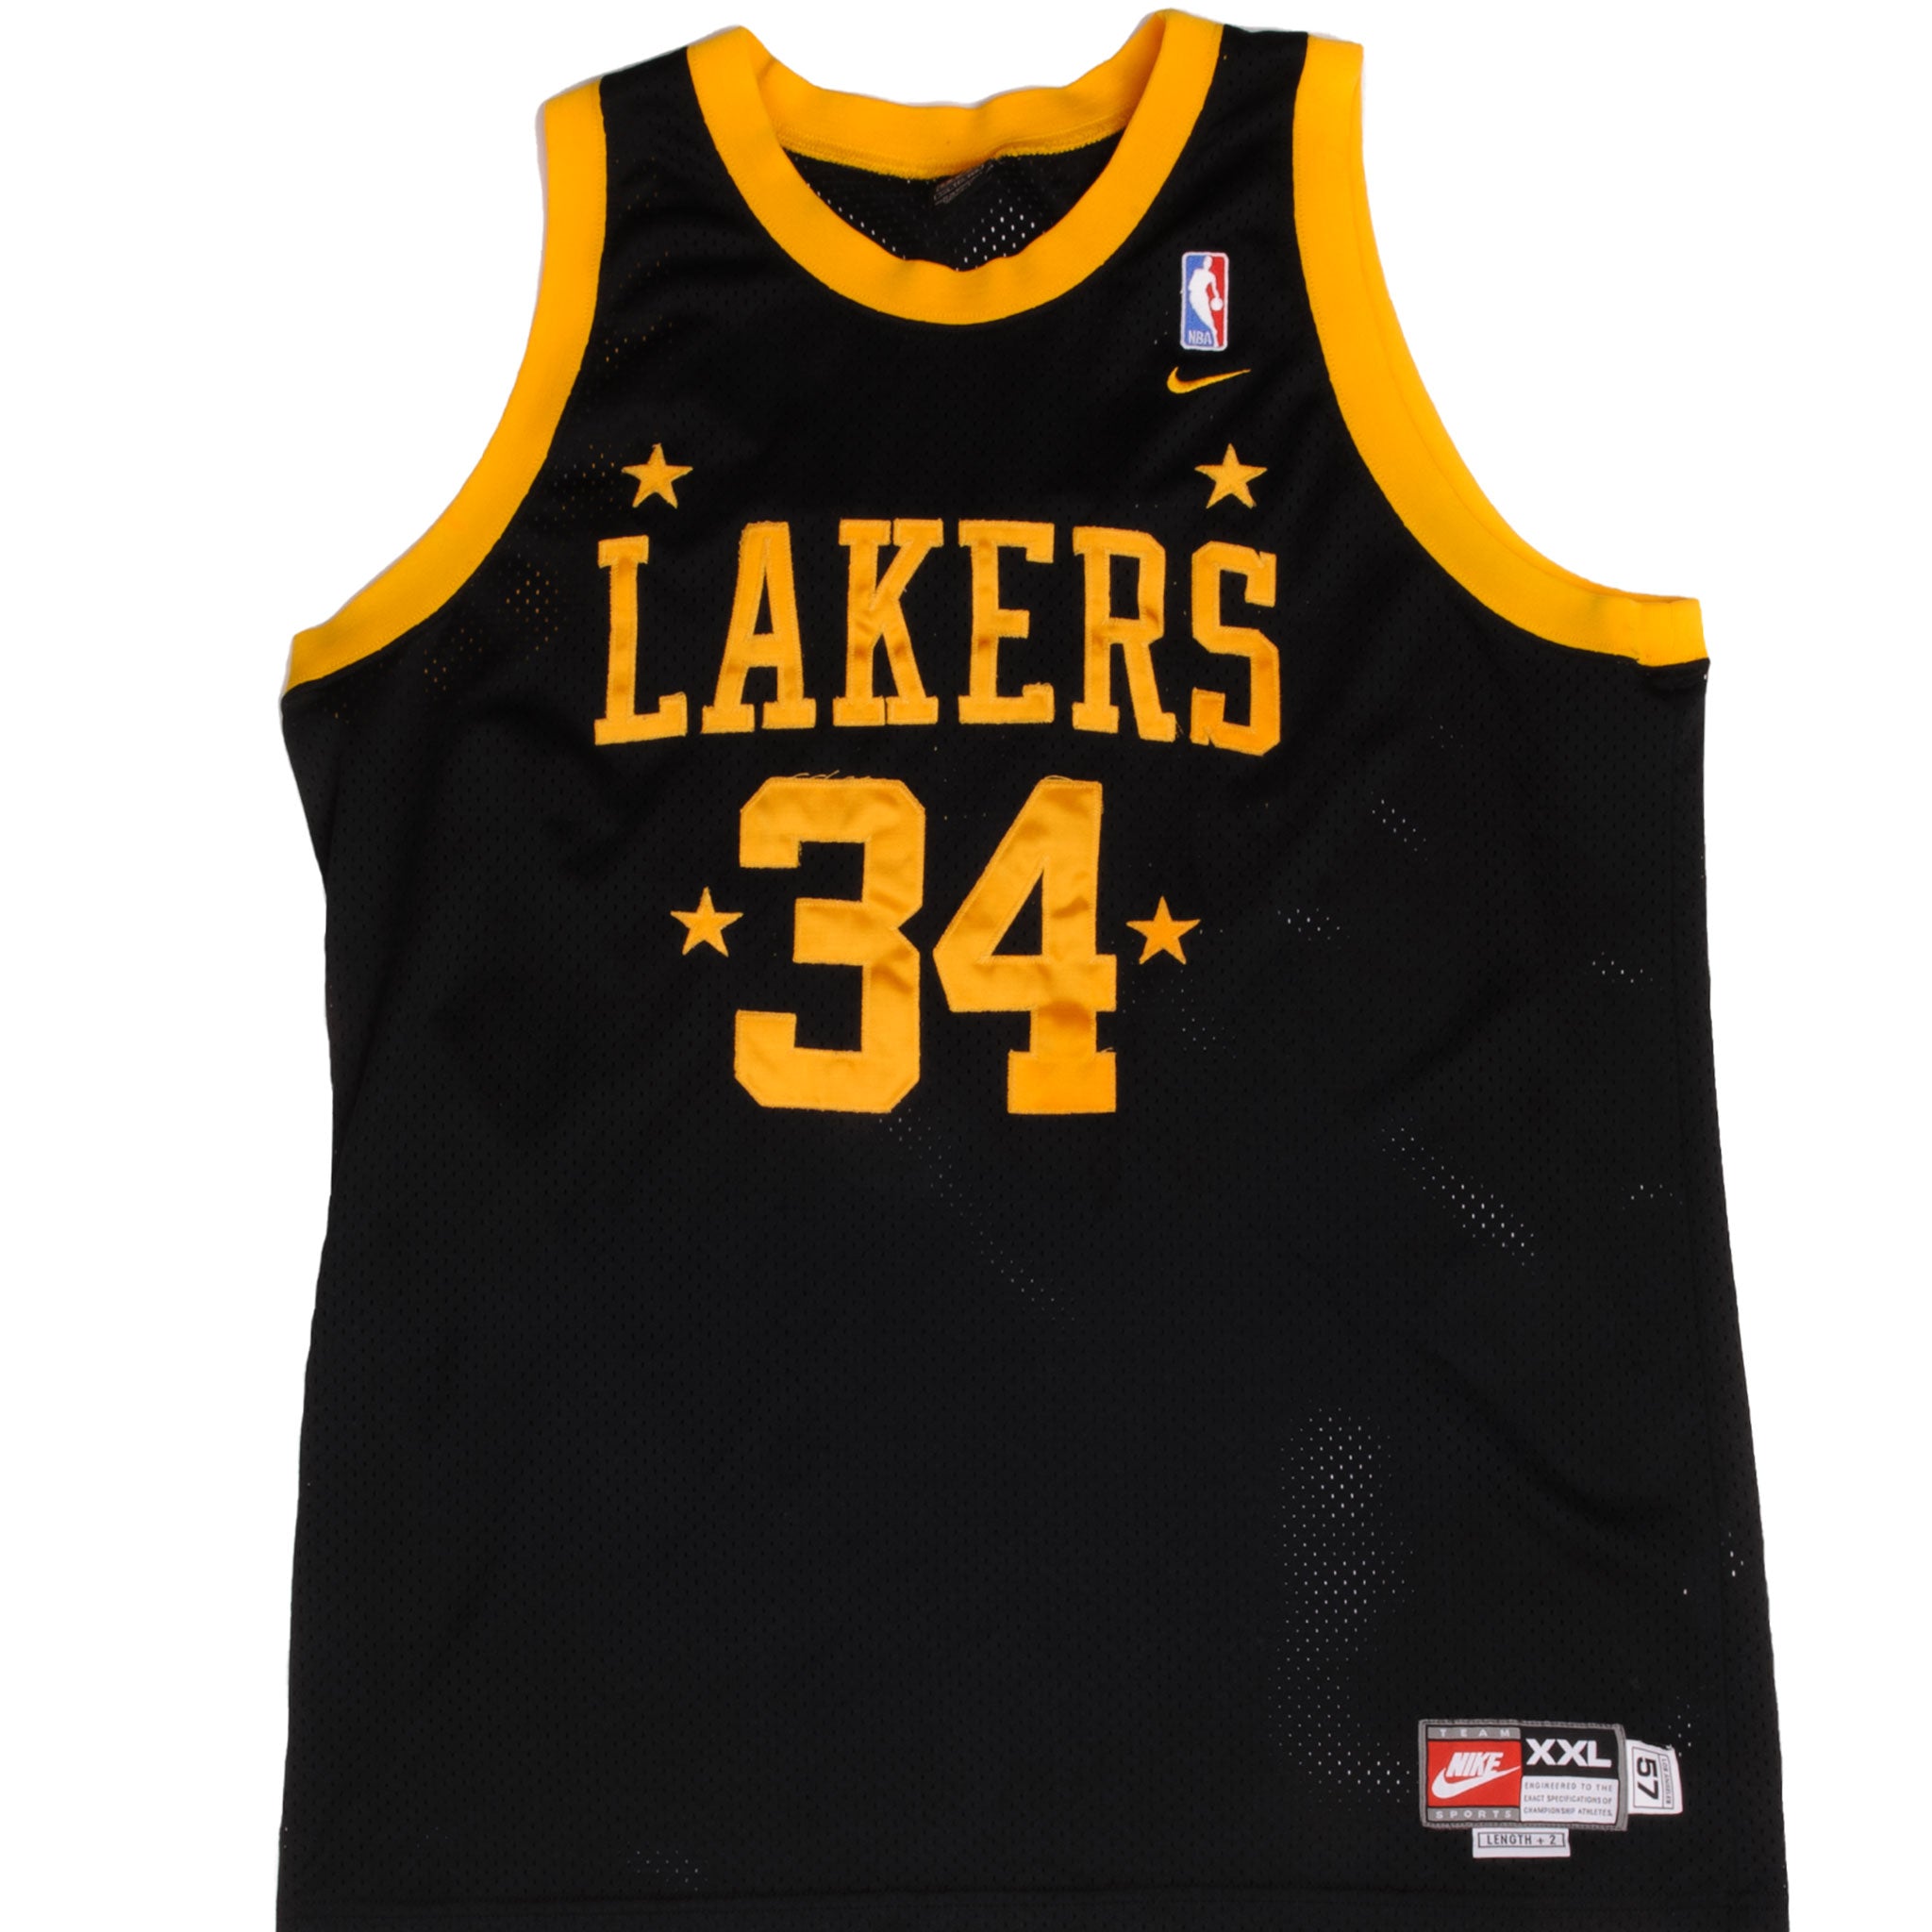 Vintage NBA Shaquille O'neal Purple Champion Lakers Jersey Number 34 Size 48